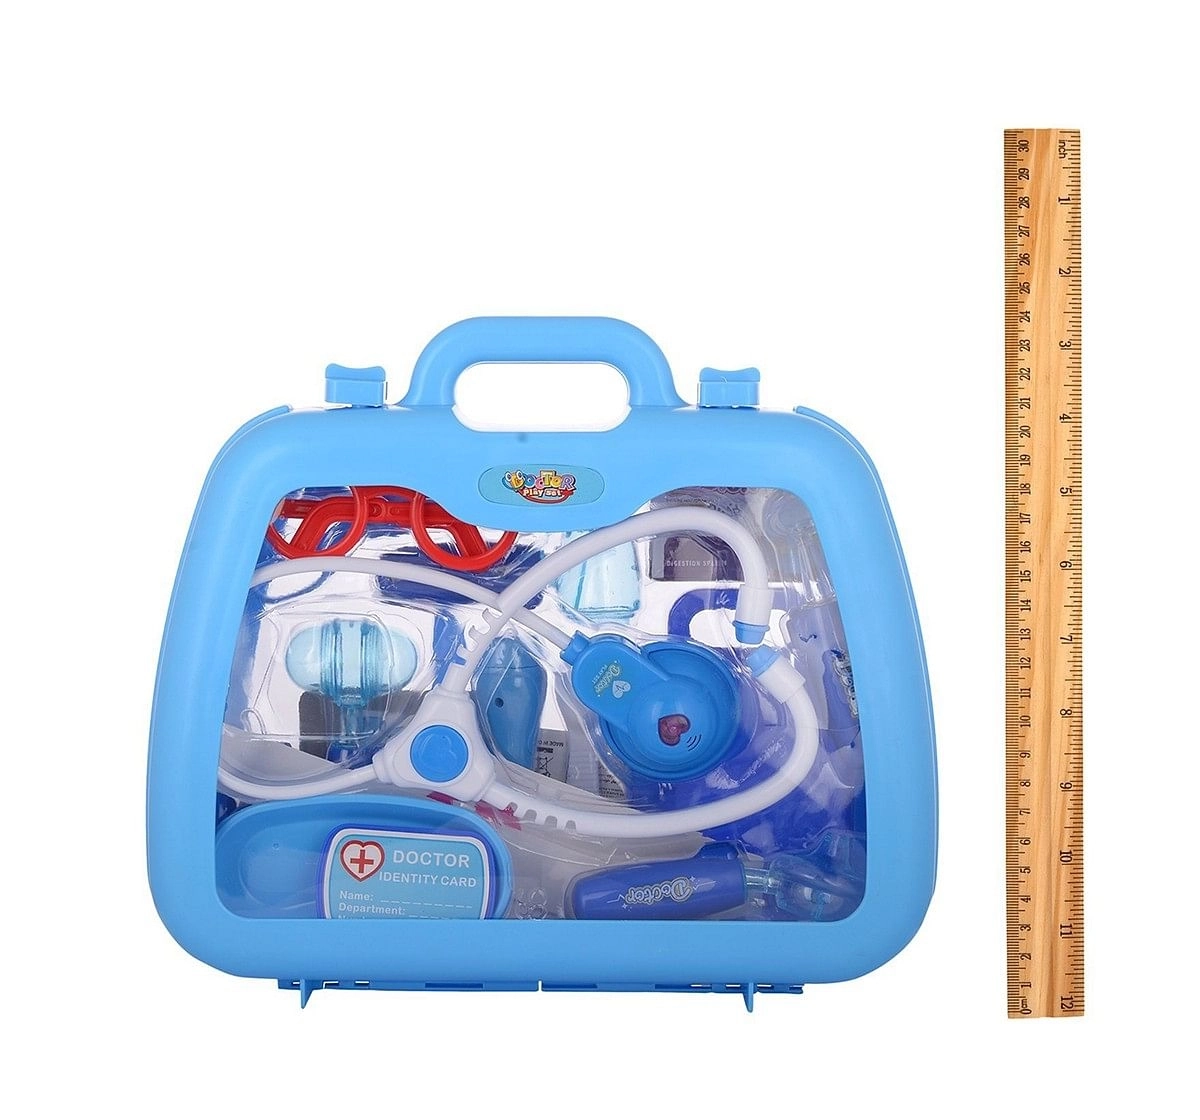 Comdaq Roleplay Doctor Set for Kids age 5Y+ (Blue)